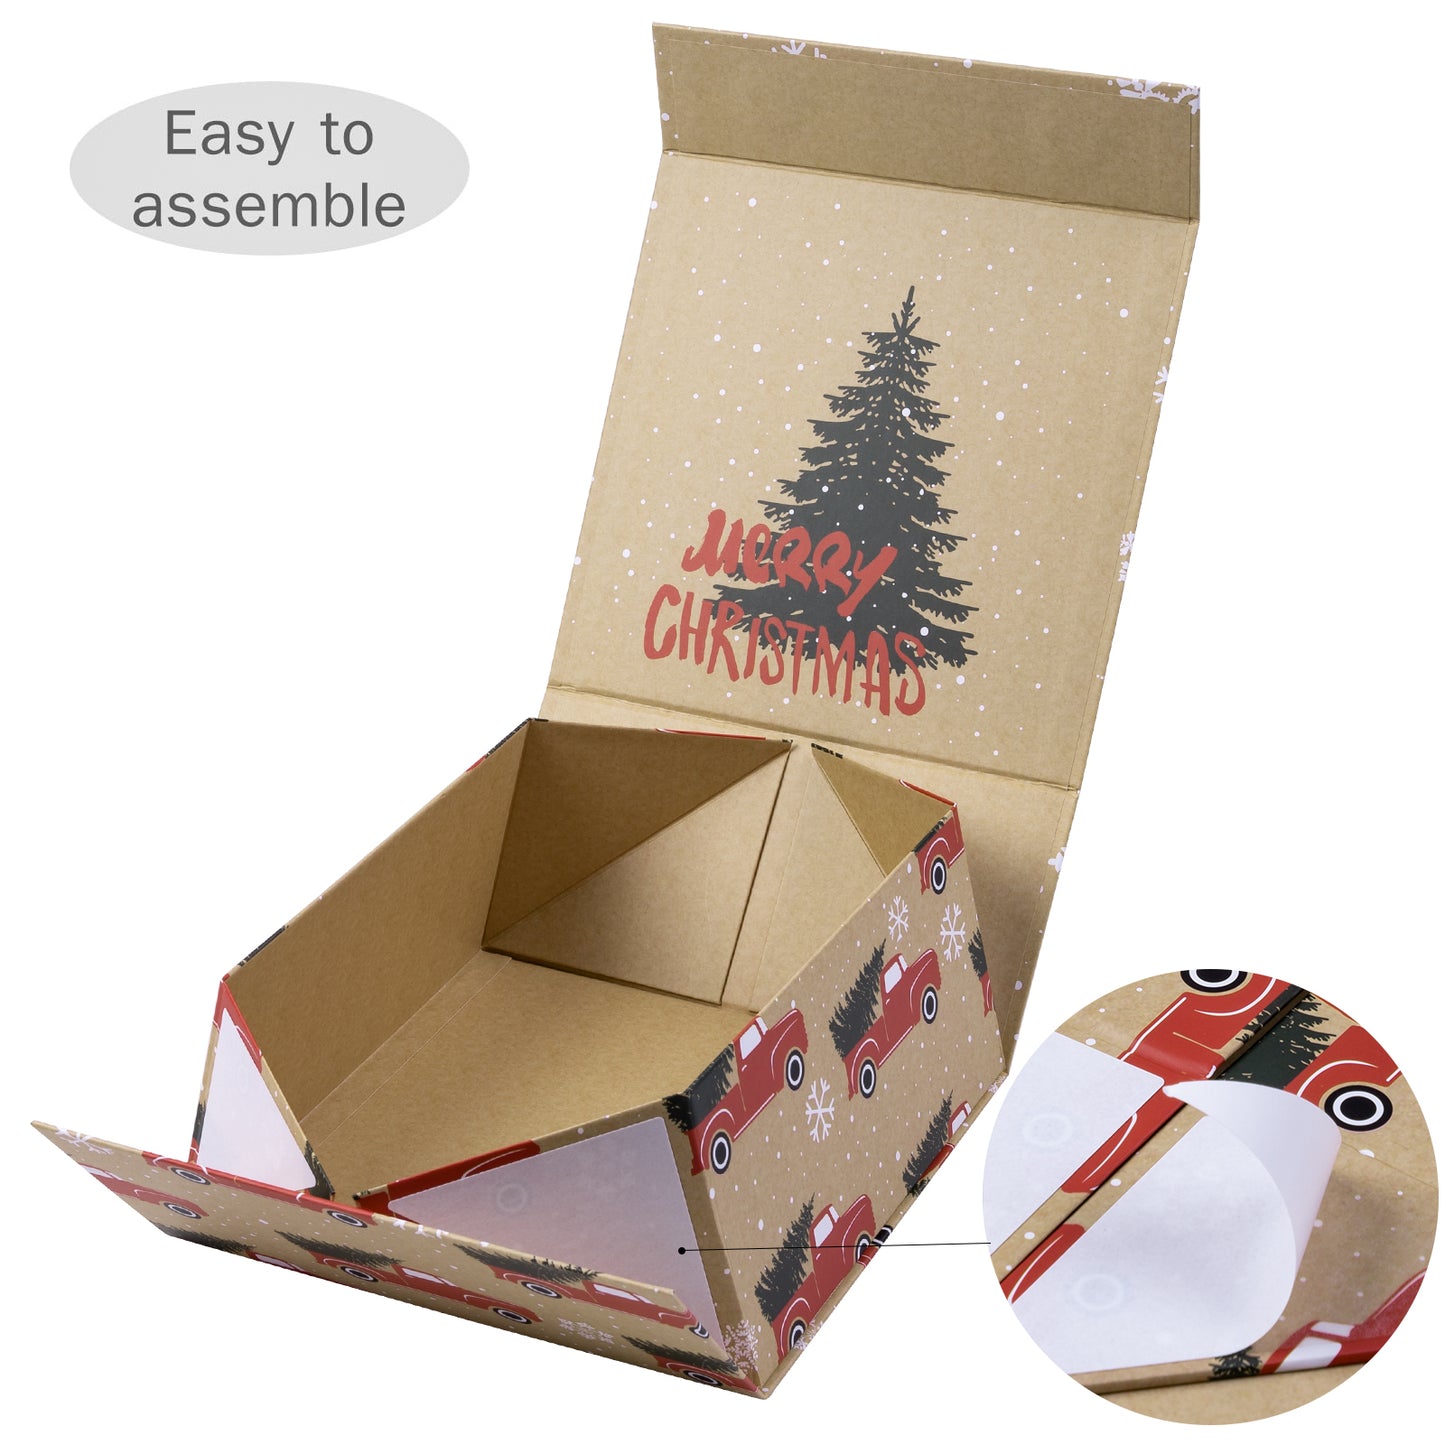 20x20x10cm Collapsible Gift Box Magnetic Closure Tree Farm Car Wedding Party Wrapping